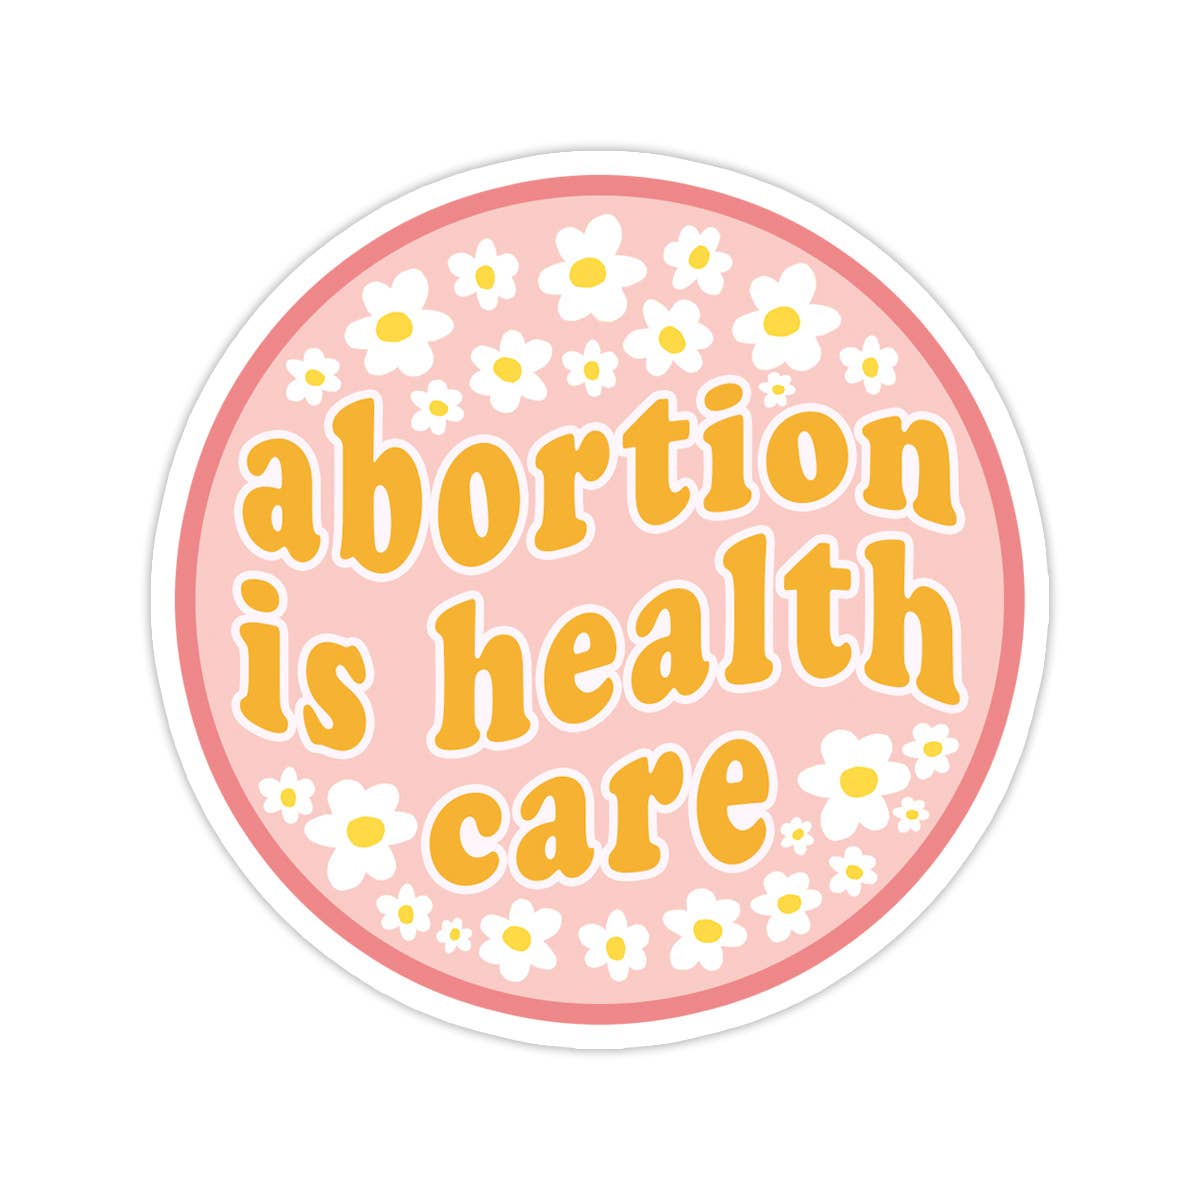 Abortion is Health Care Sticker - Spiral Circle